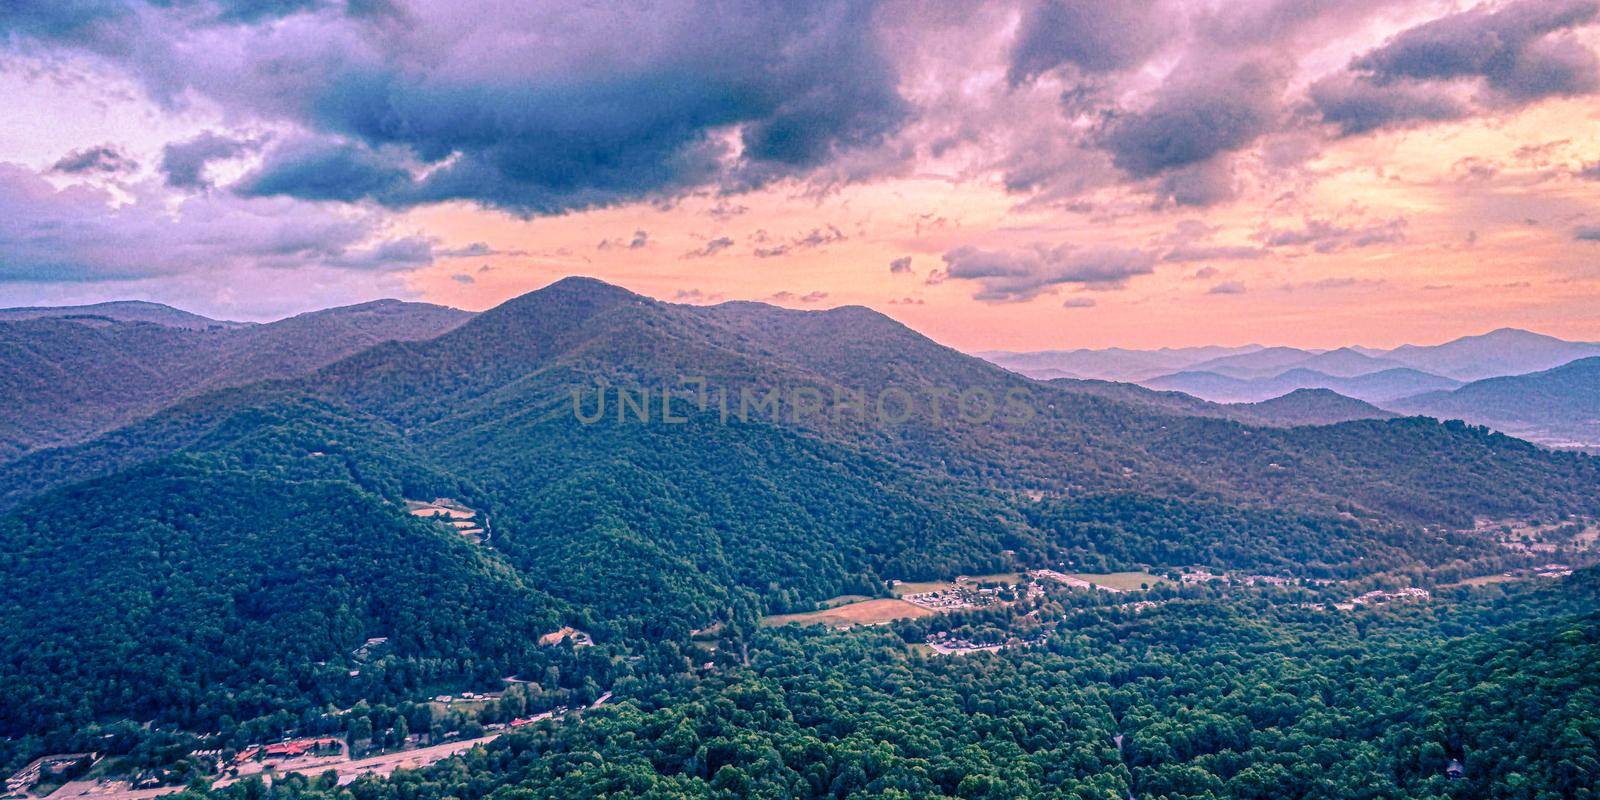 beautiful nature scenery in maggie valley north carolina by digidreamgrafix